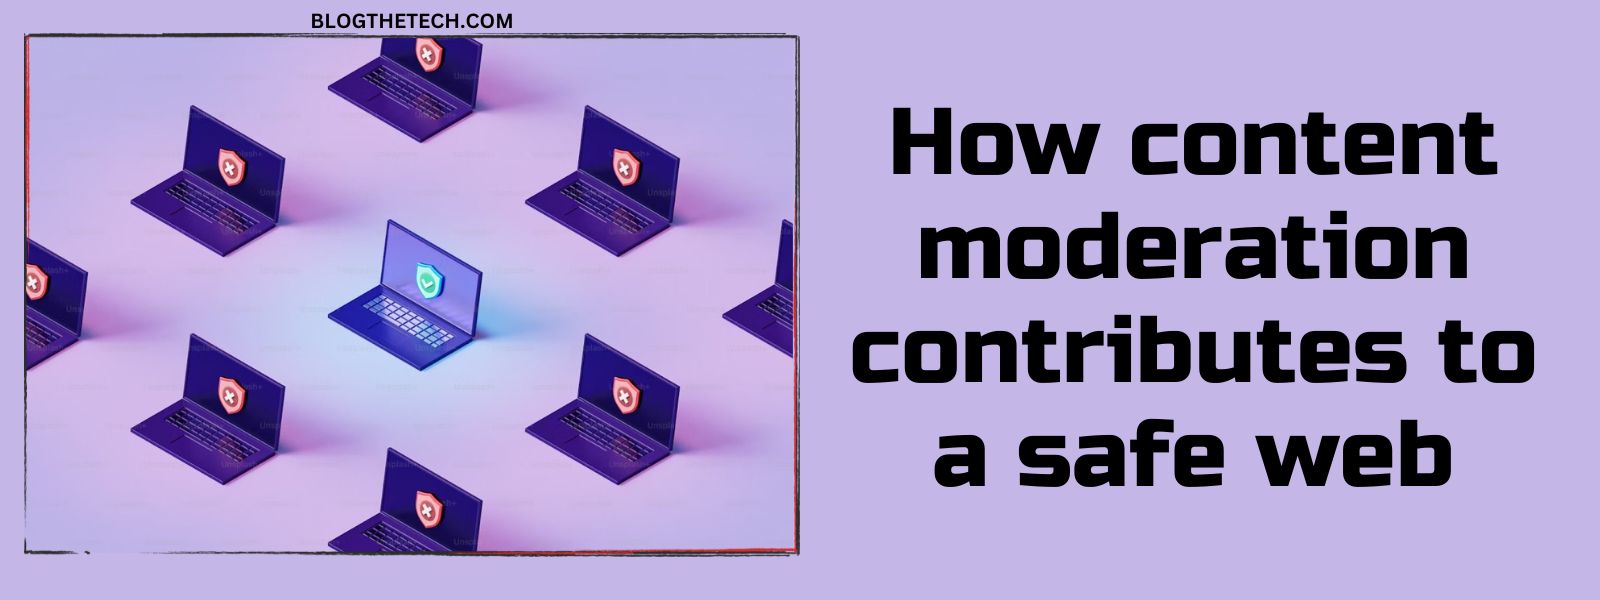 How content moderation contributes to a safe web